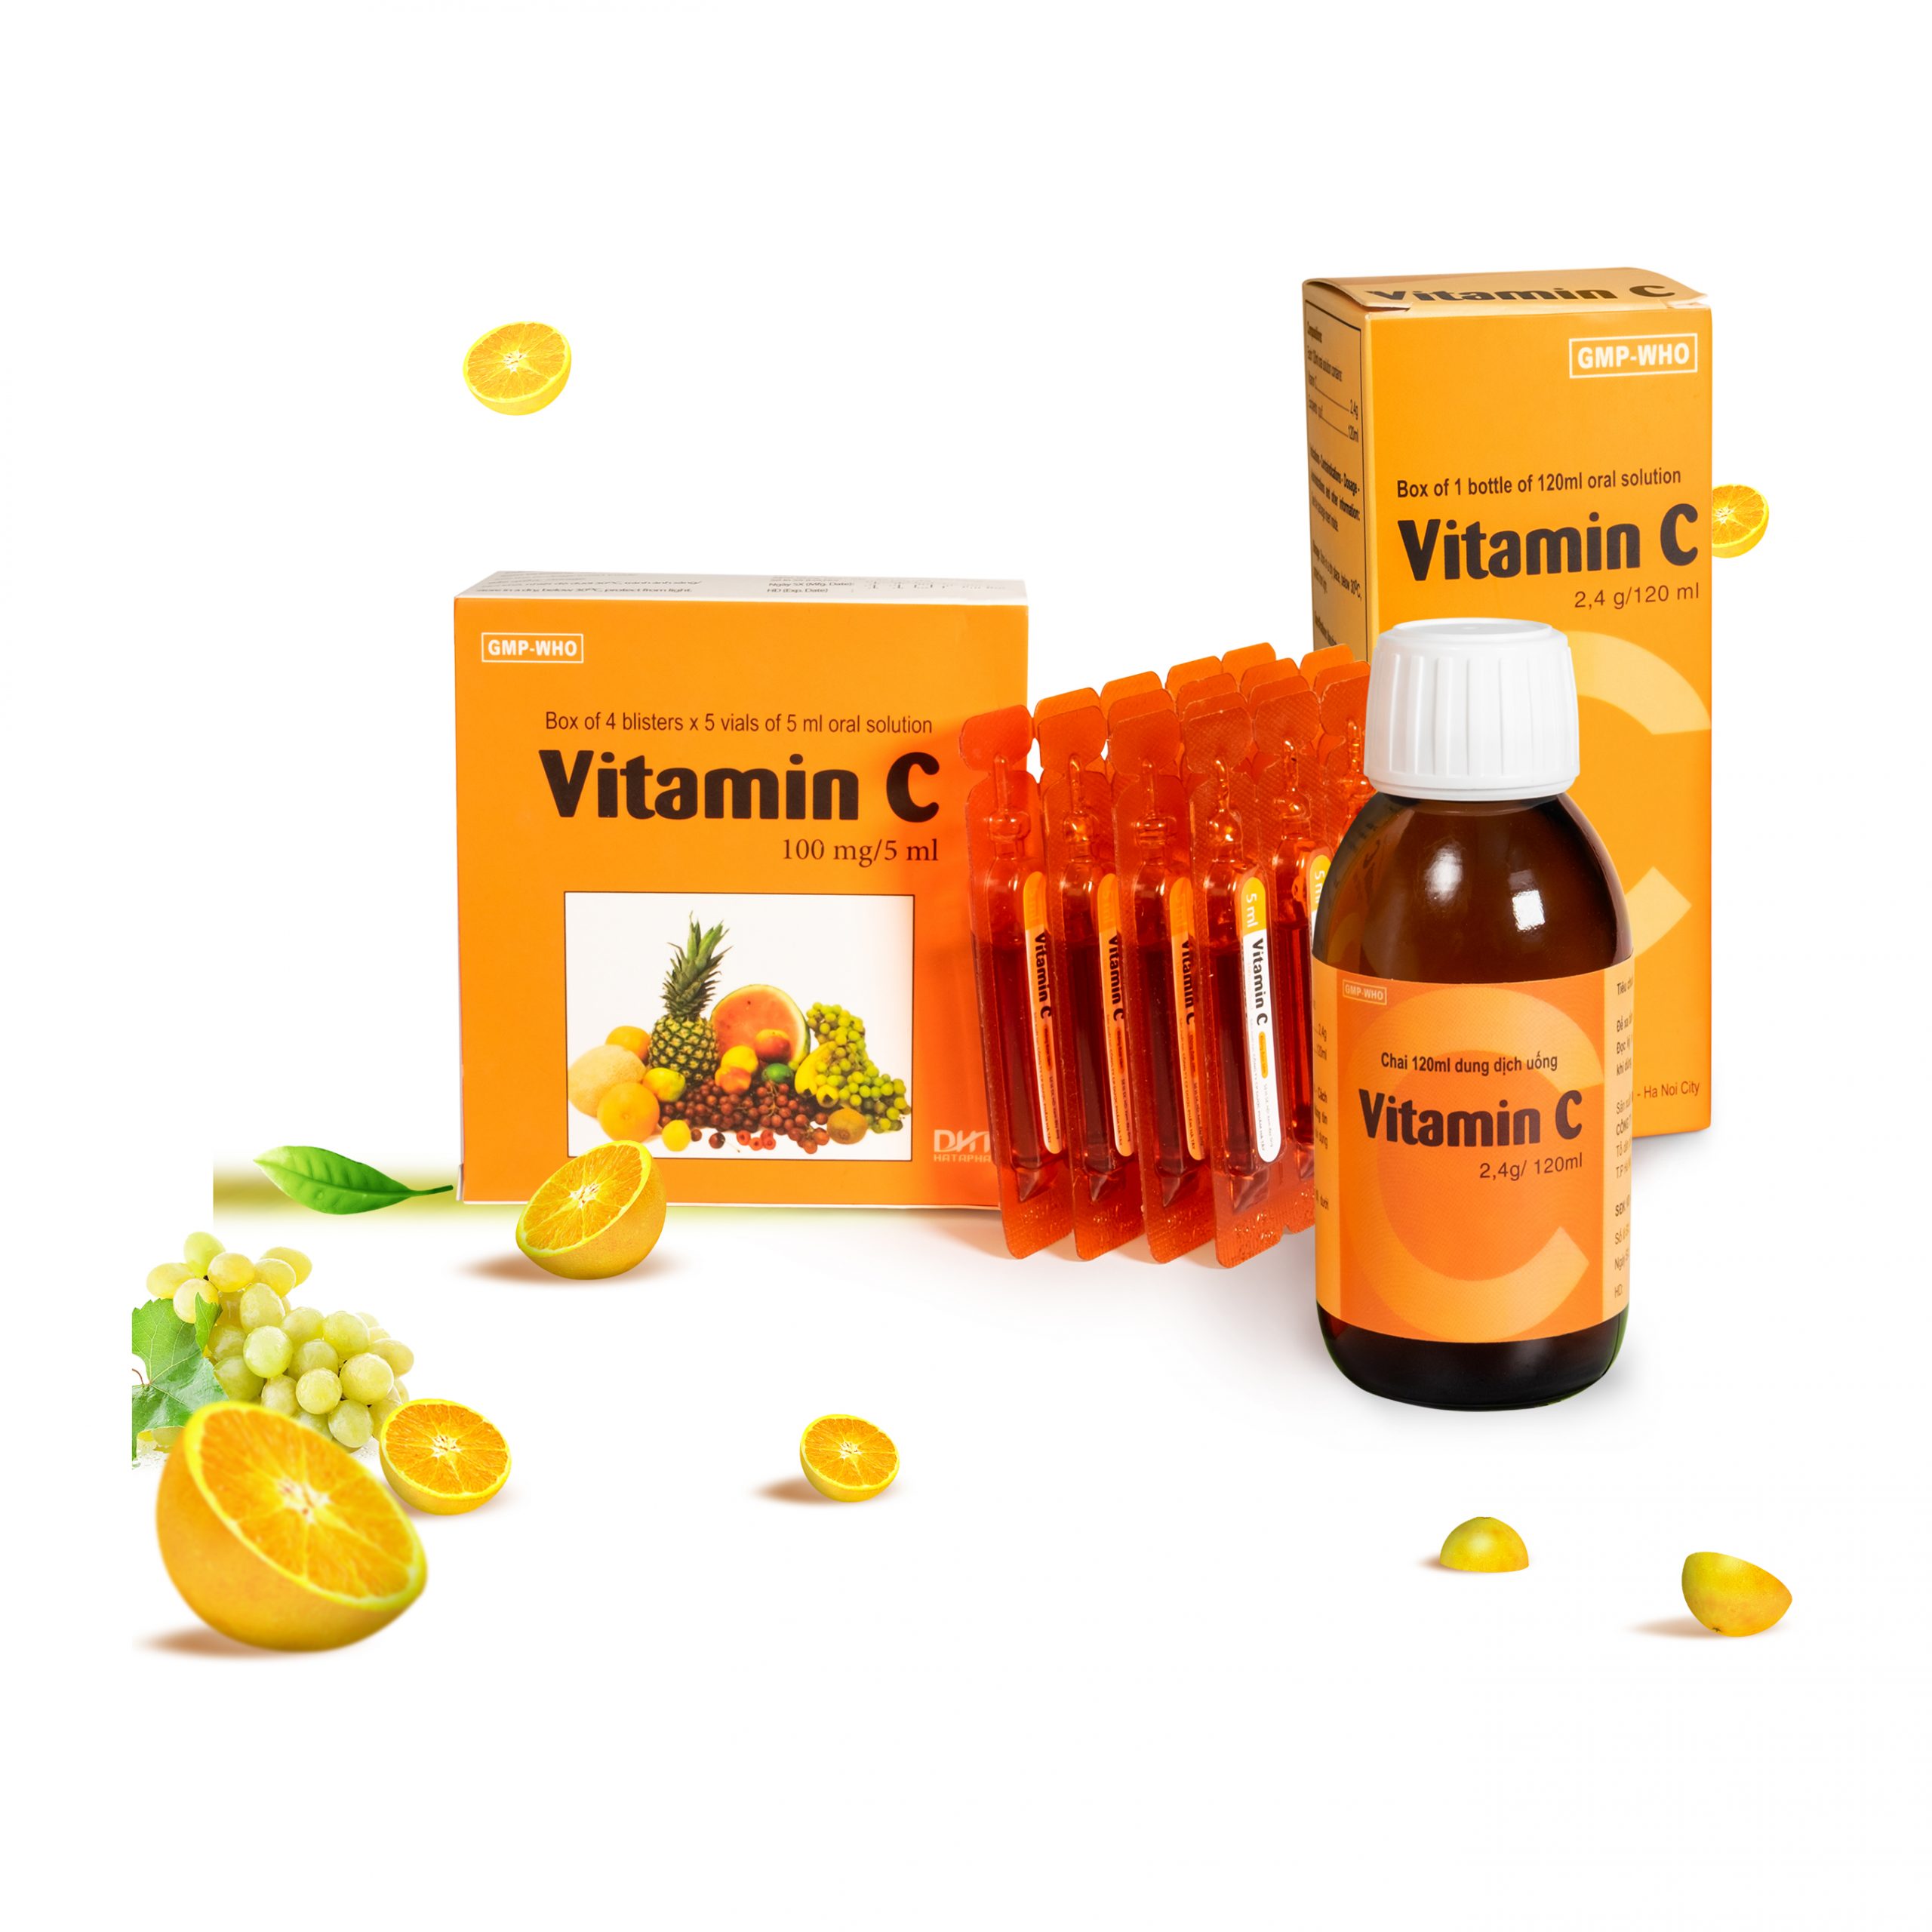 How does vitamin C support the body in boosting the immune system?
